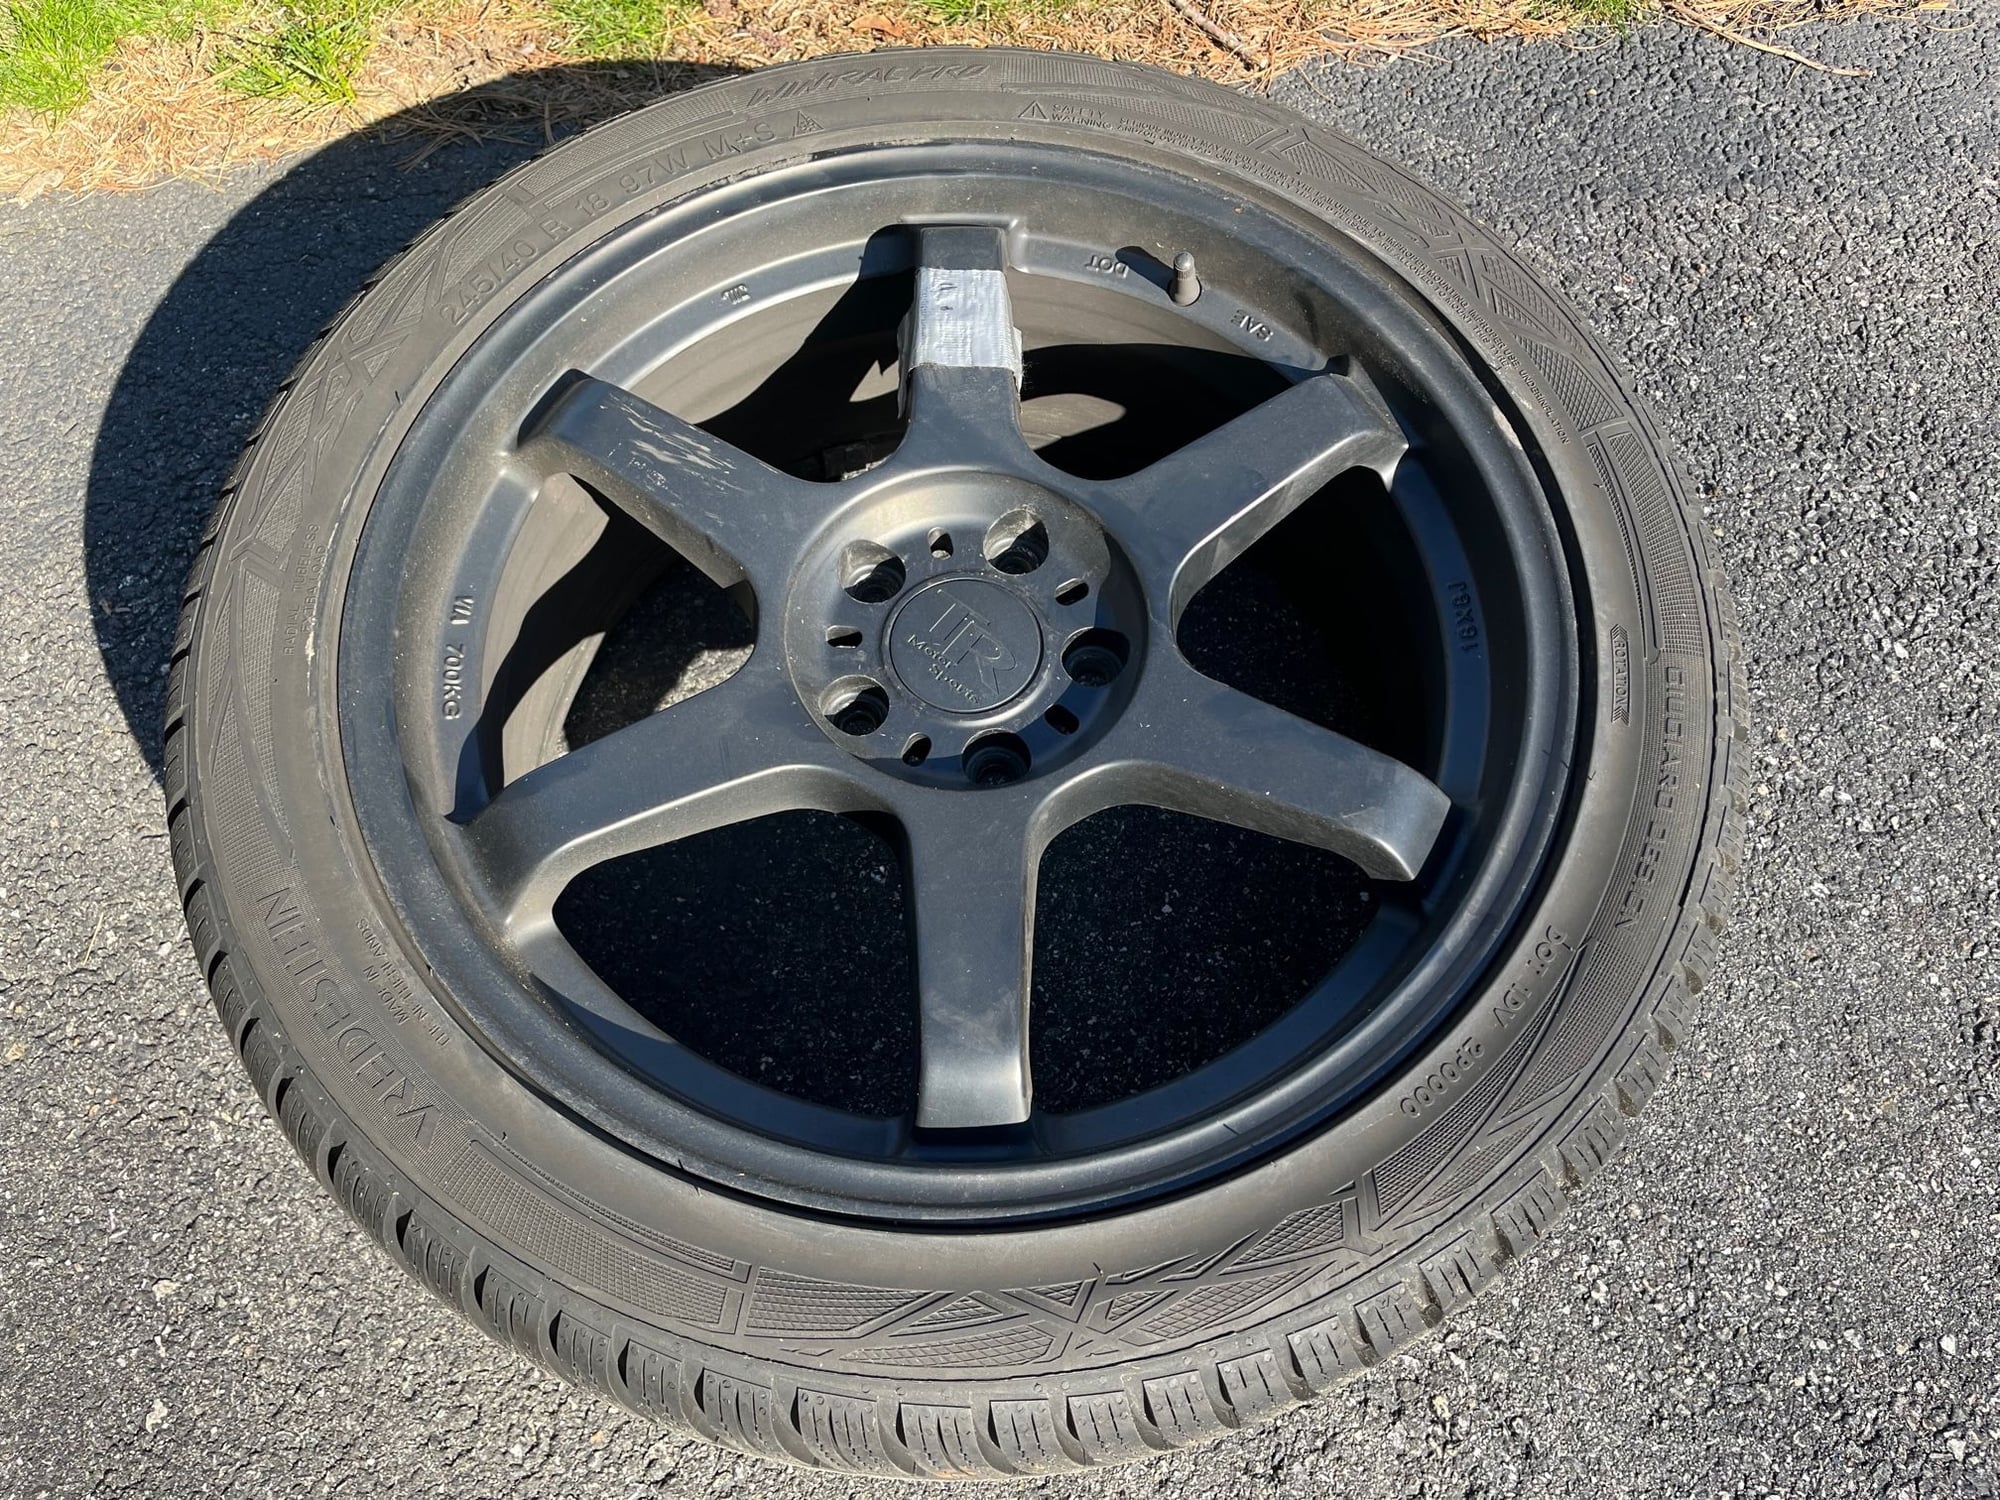 Wheels and Tires/Axles - $800 Full Winter set 18x8 TRMotorsport C4 Black w/ 245/40R18 Vredestein WintracPro XL - Used - All Years  All Models - All Years  All Models - Wilmington, MA 01887, United States